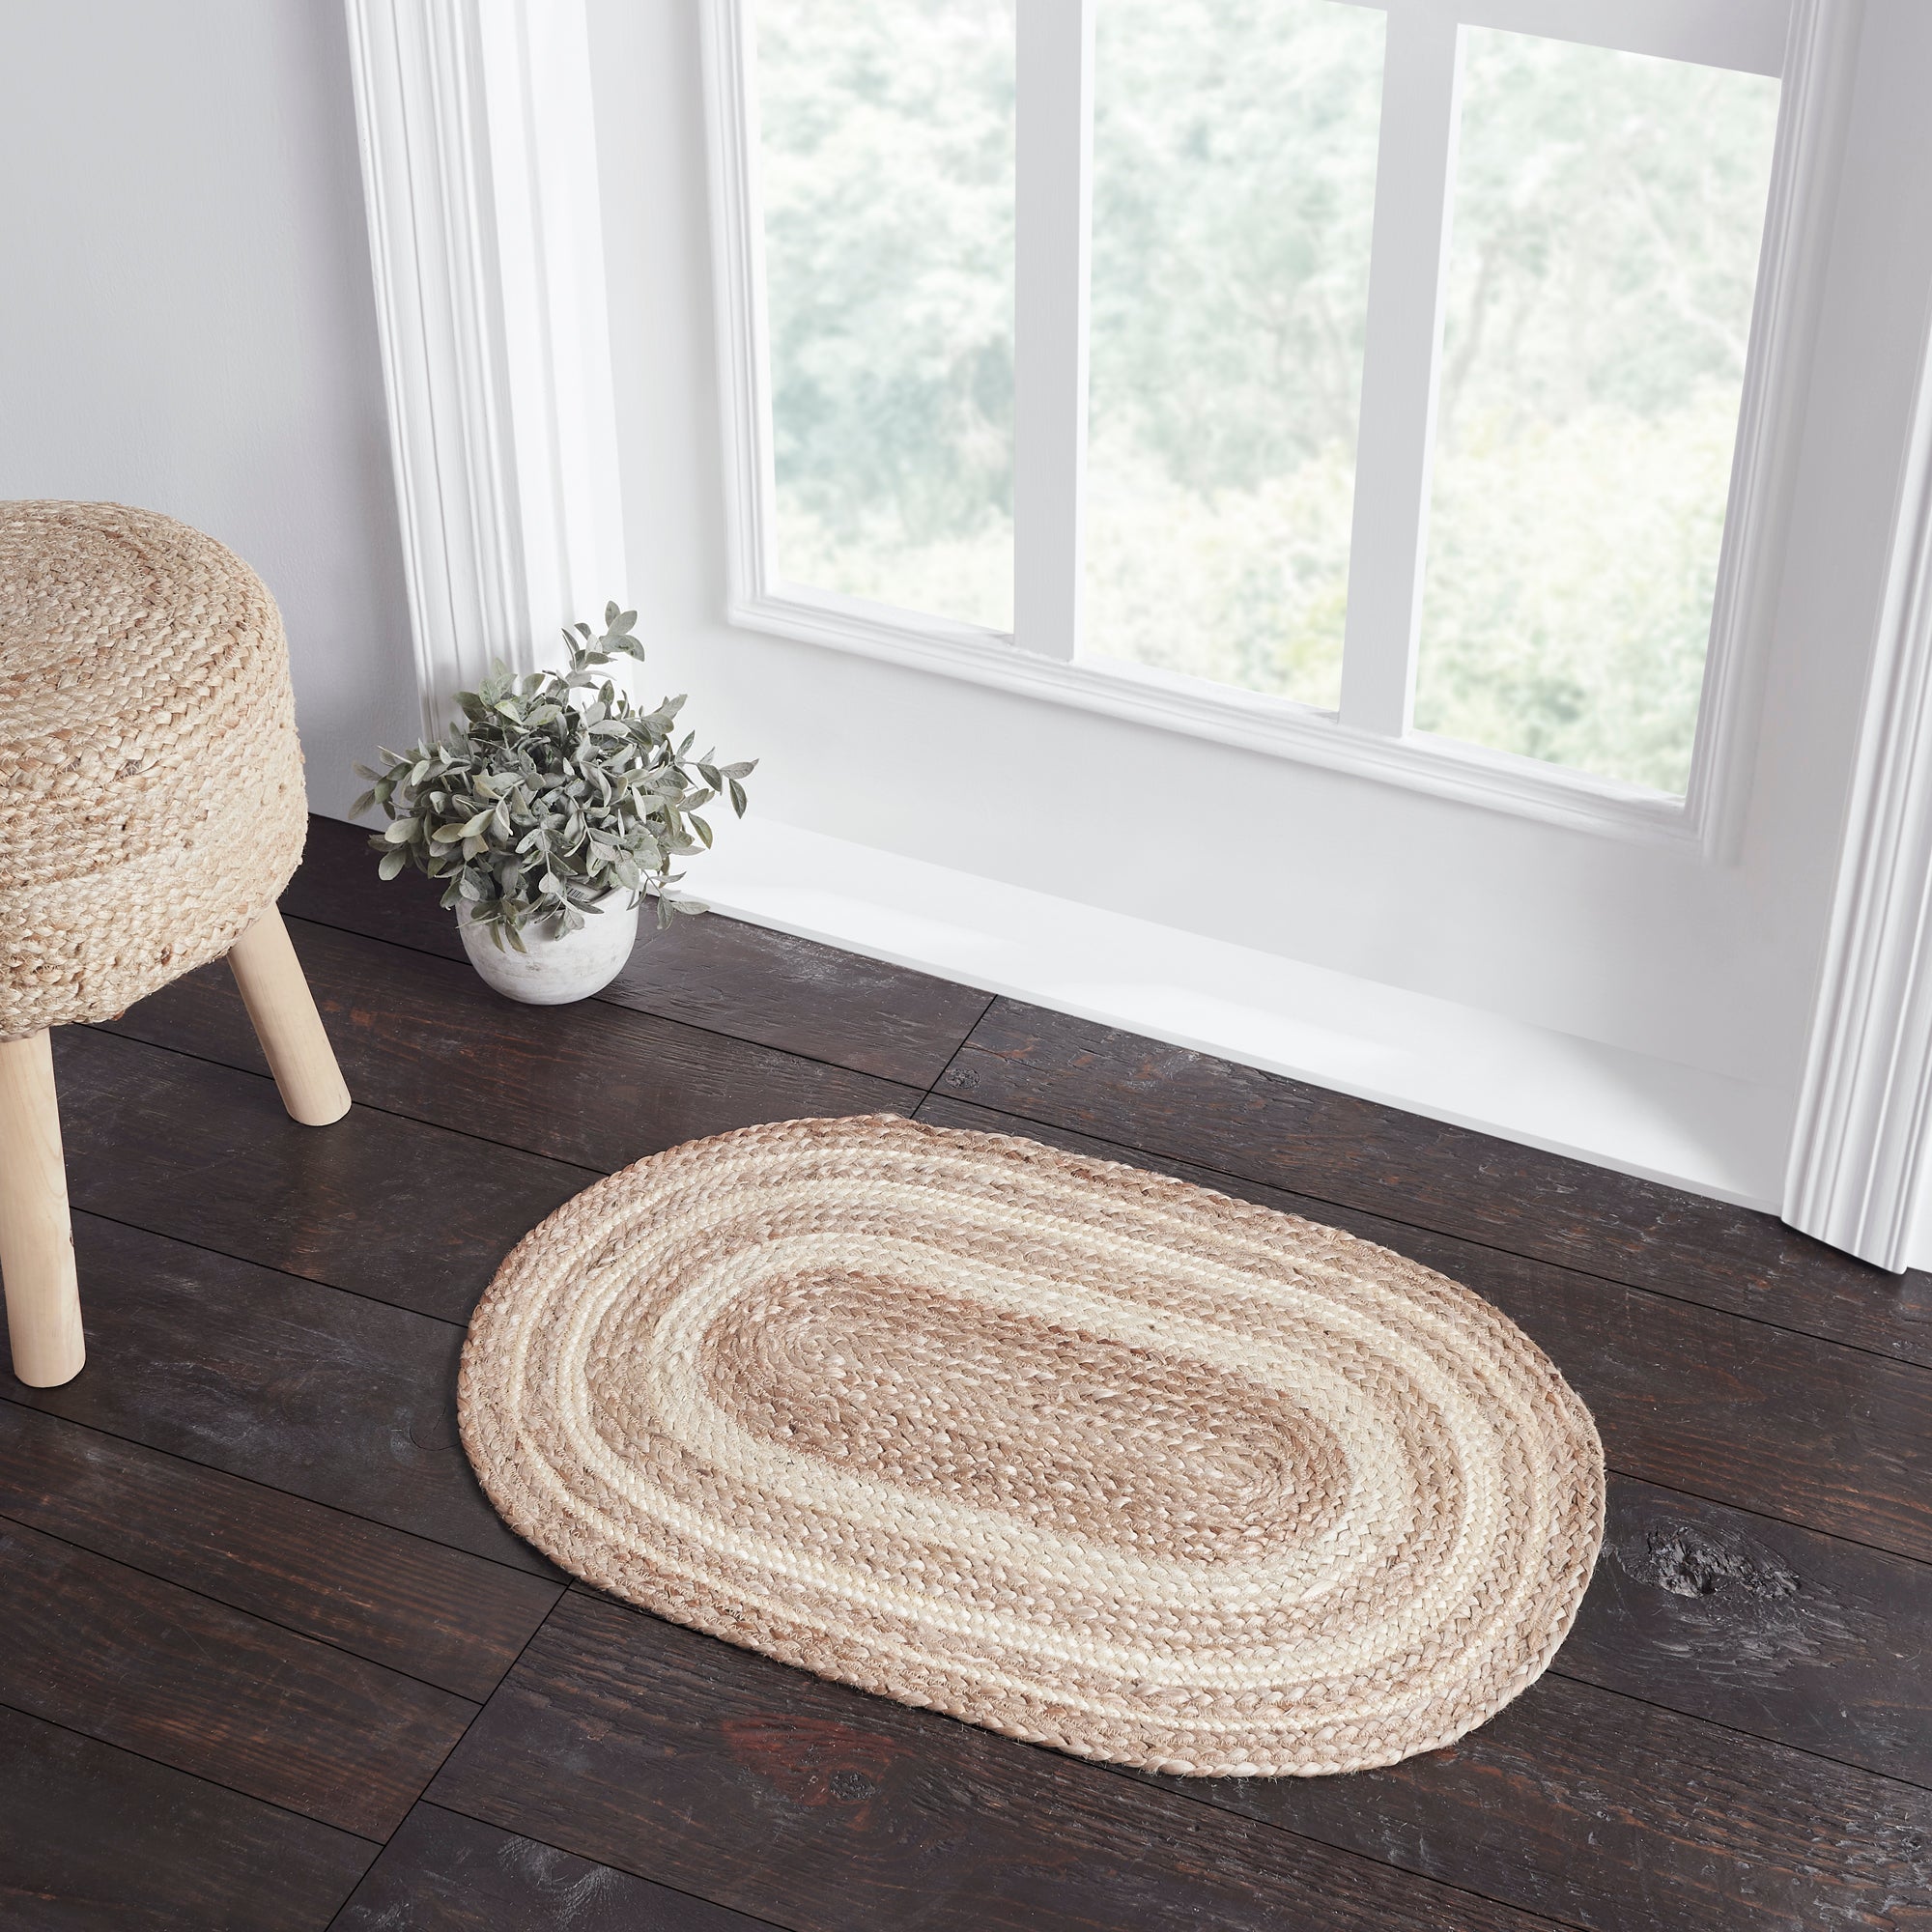 Jute Oval Rug Braided Style 100% Natural Jute Area Rug Home